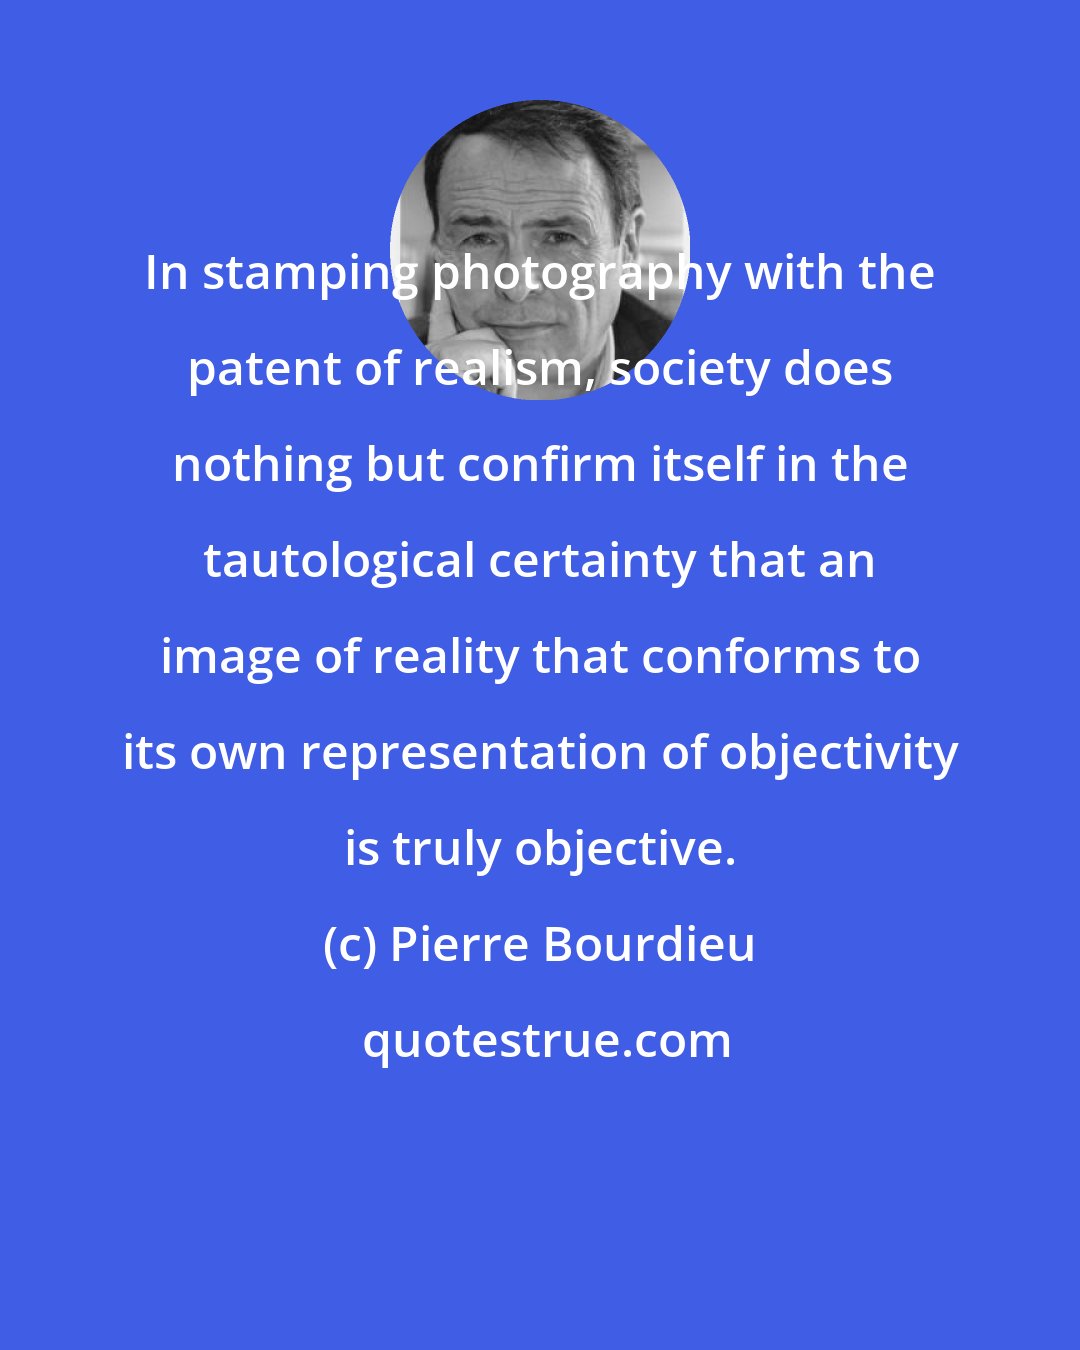 Pierre Bourdieu: In stamping photography with the patent of realism, society does nothing but confirm itself in the tautological certainty that an image of reality that conforms to its own representation of objectivity is truly objective.